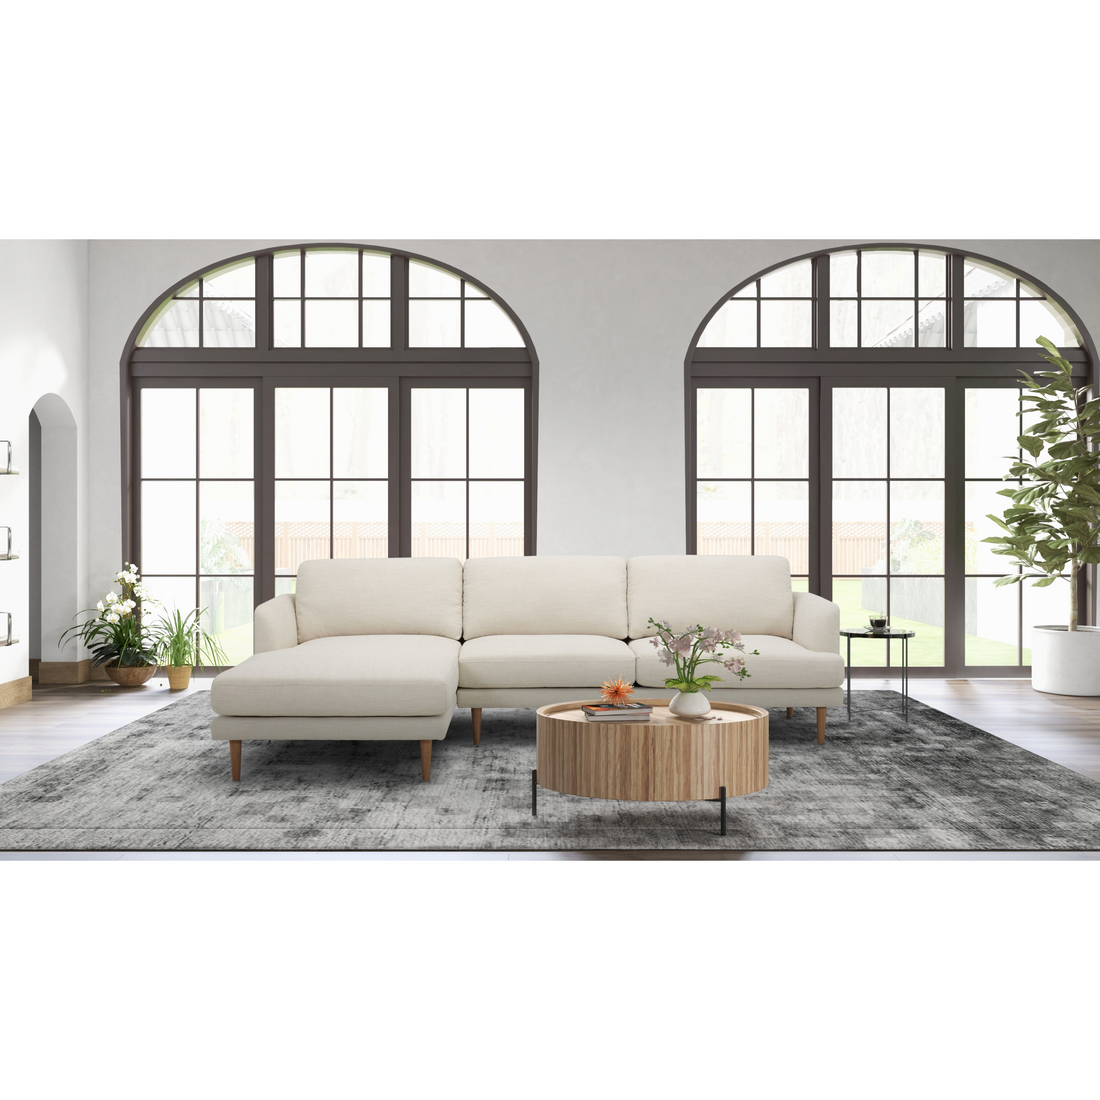 Alicante Beige Sectional